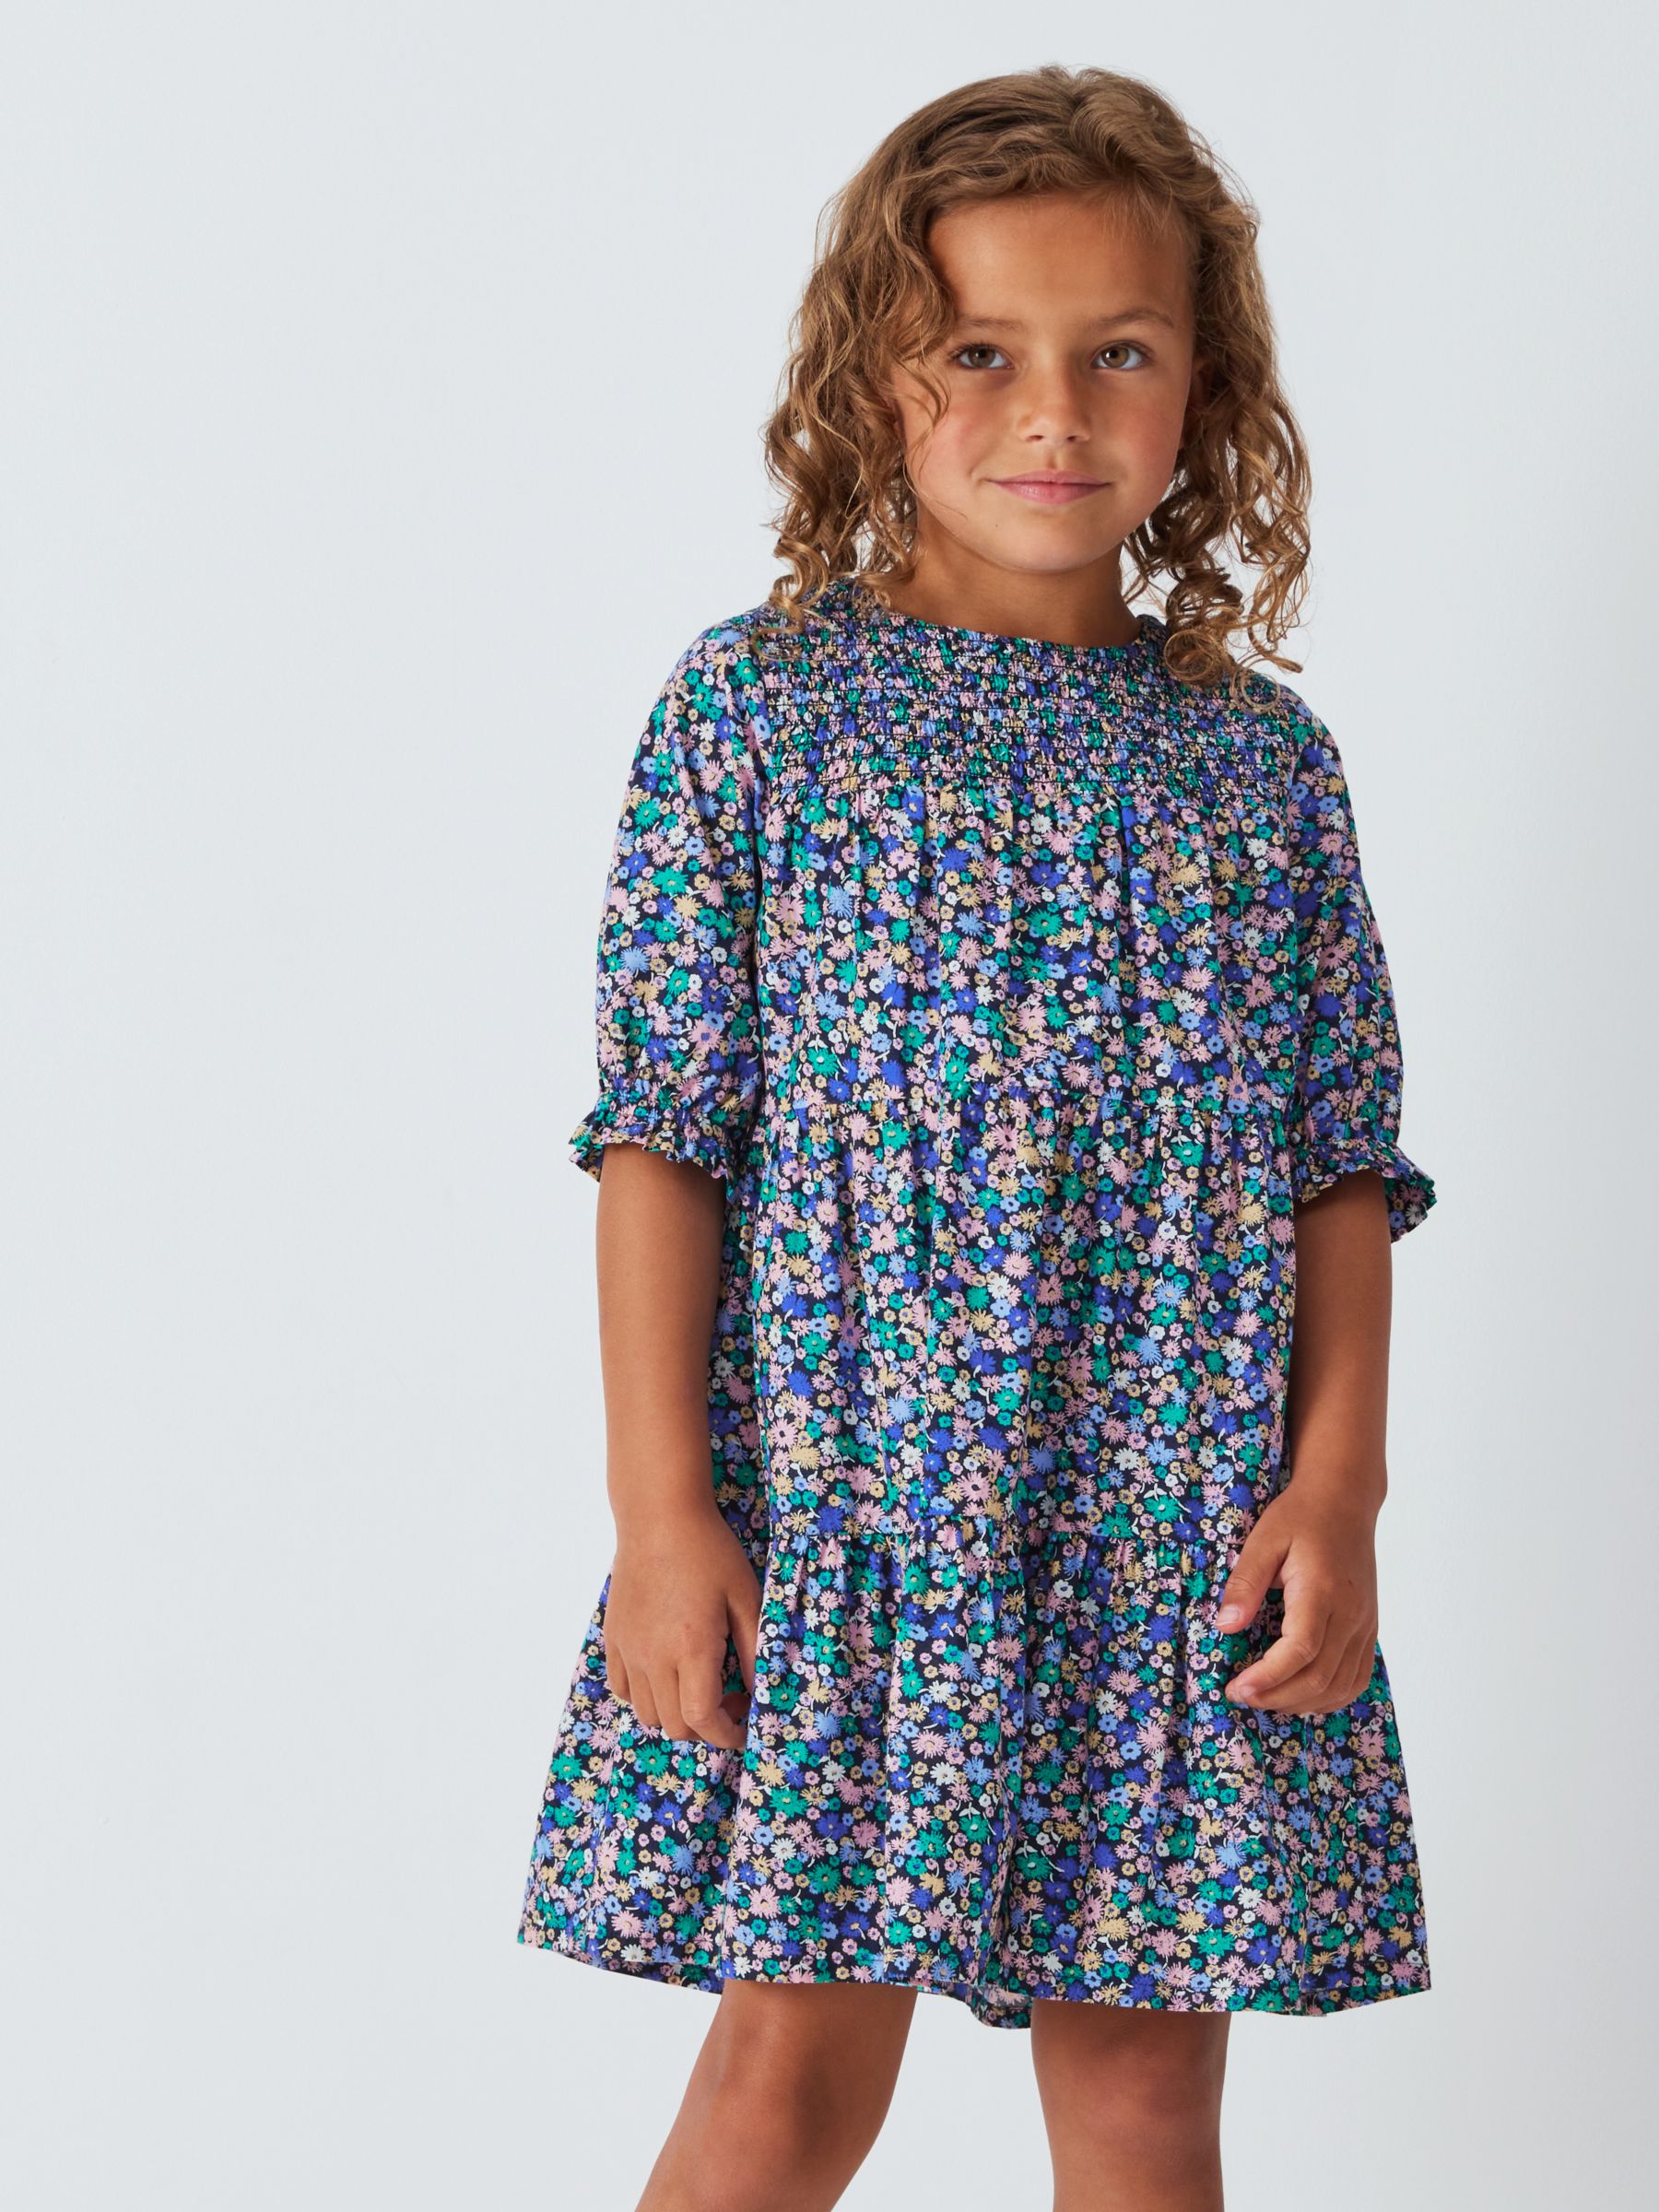 John Lewis Kids' Floral Tiered Dress, Outer Space at John Lewis & Partners